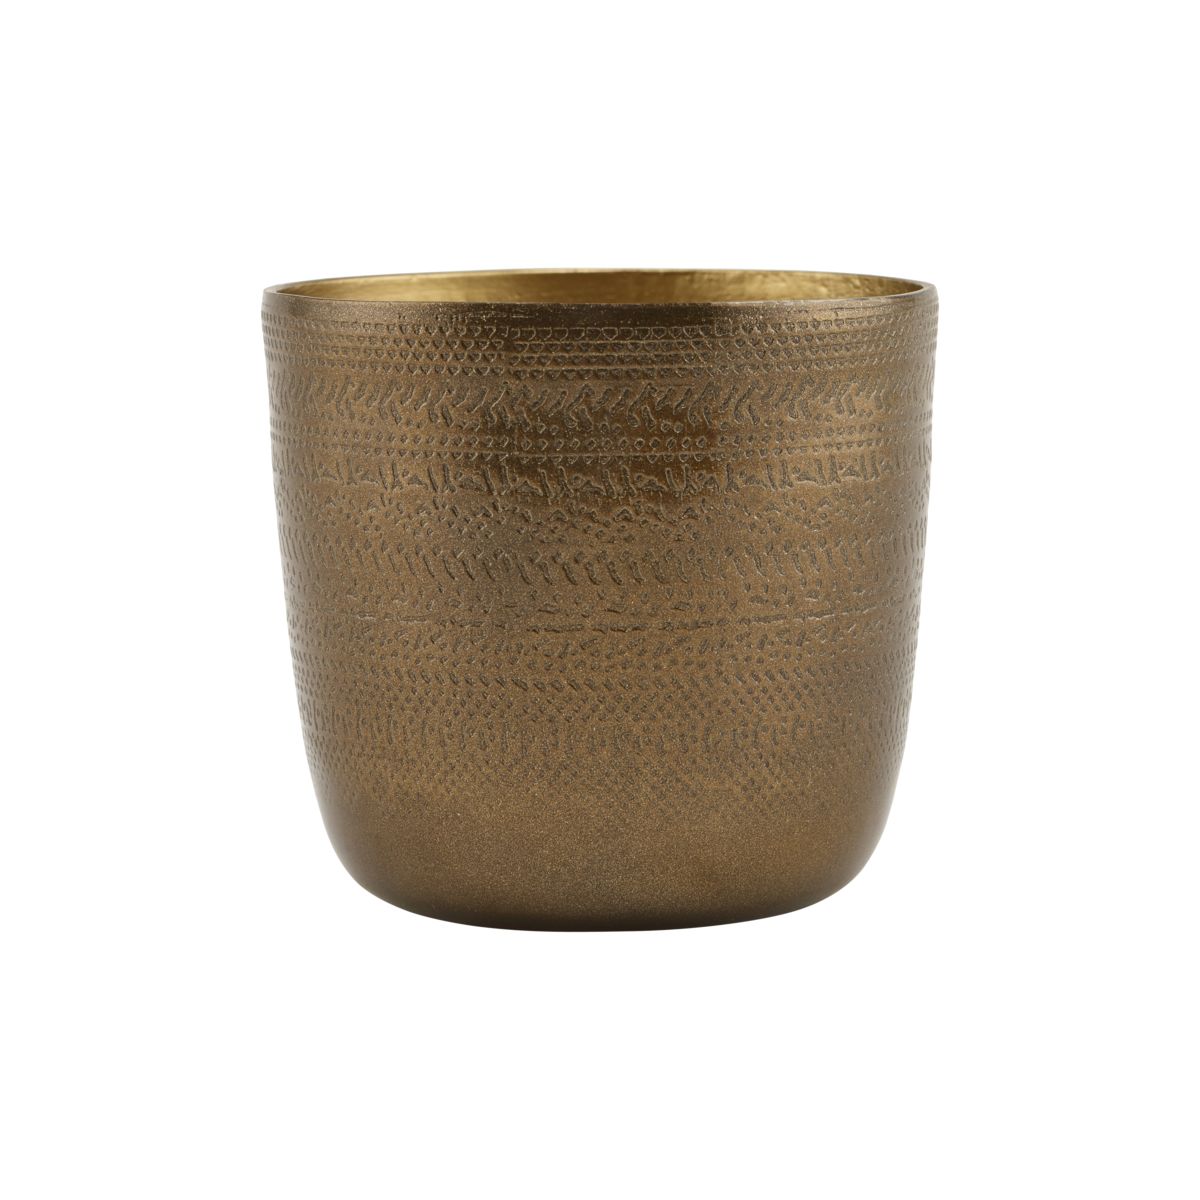 House Doctor Planter, Chappra, Antique brass finish